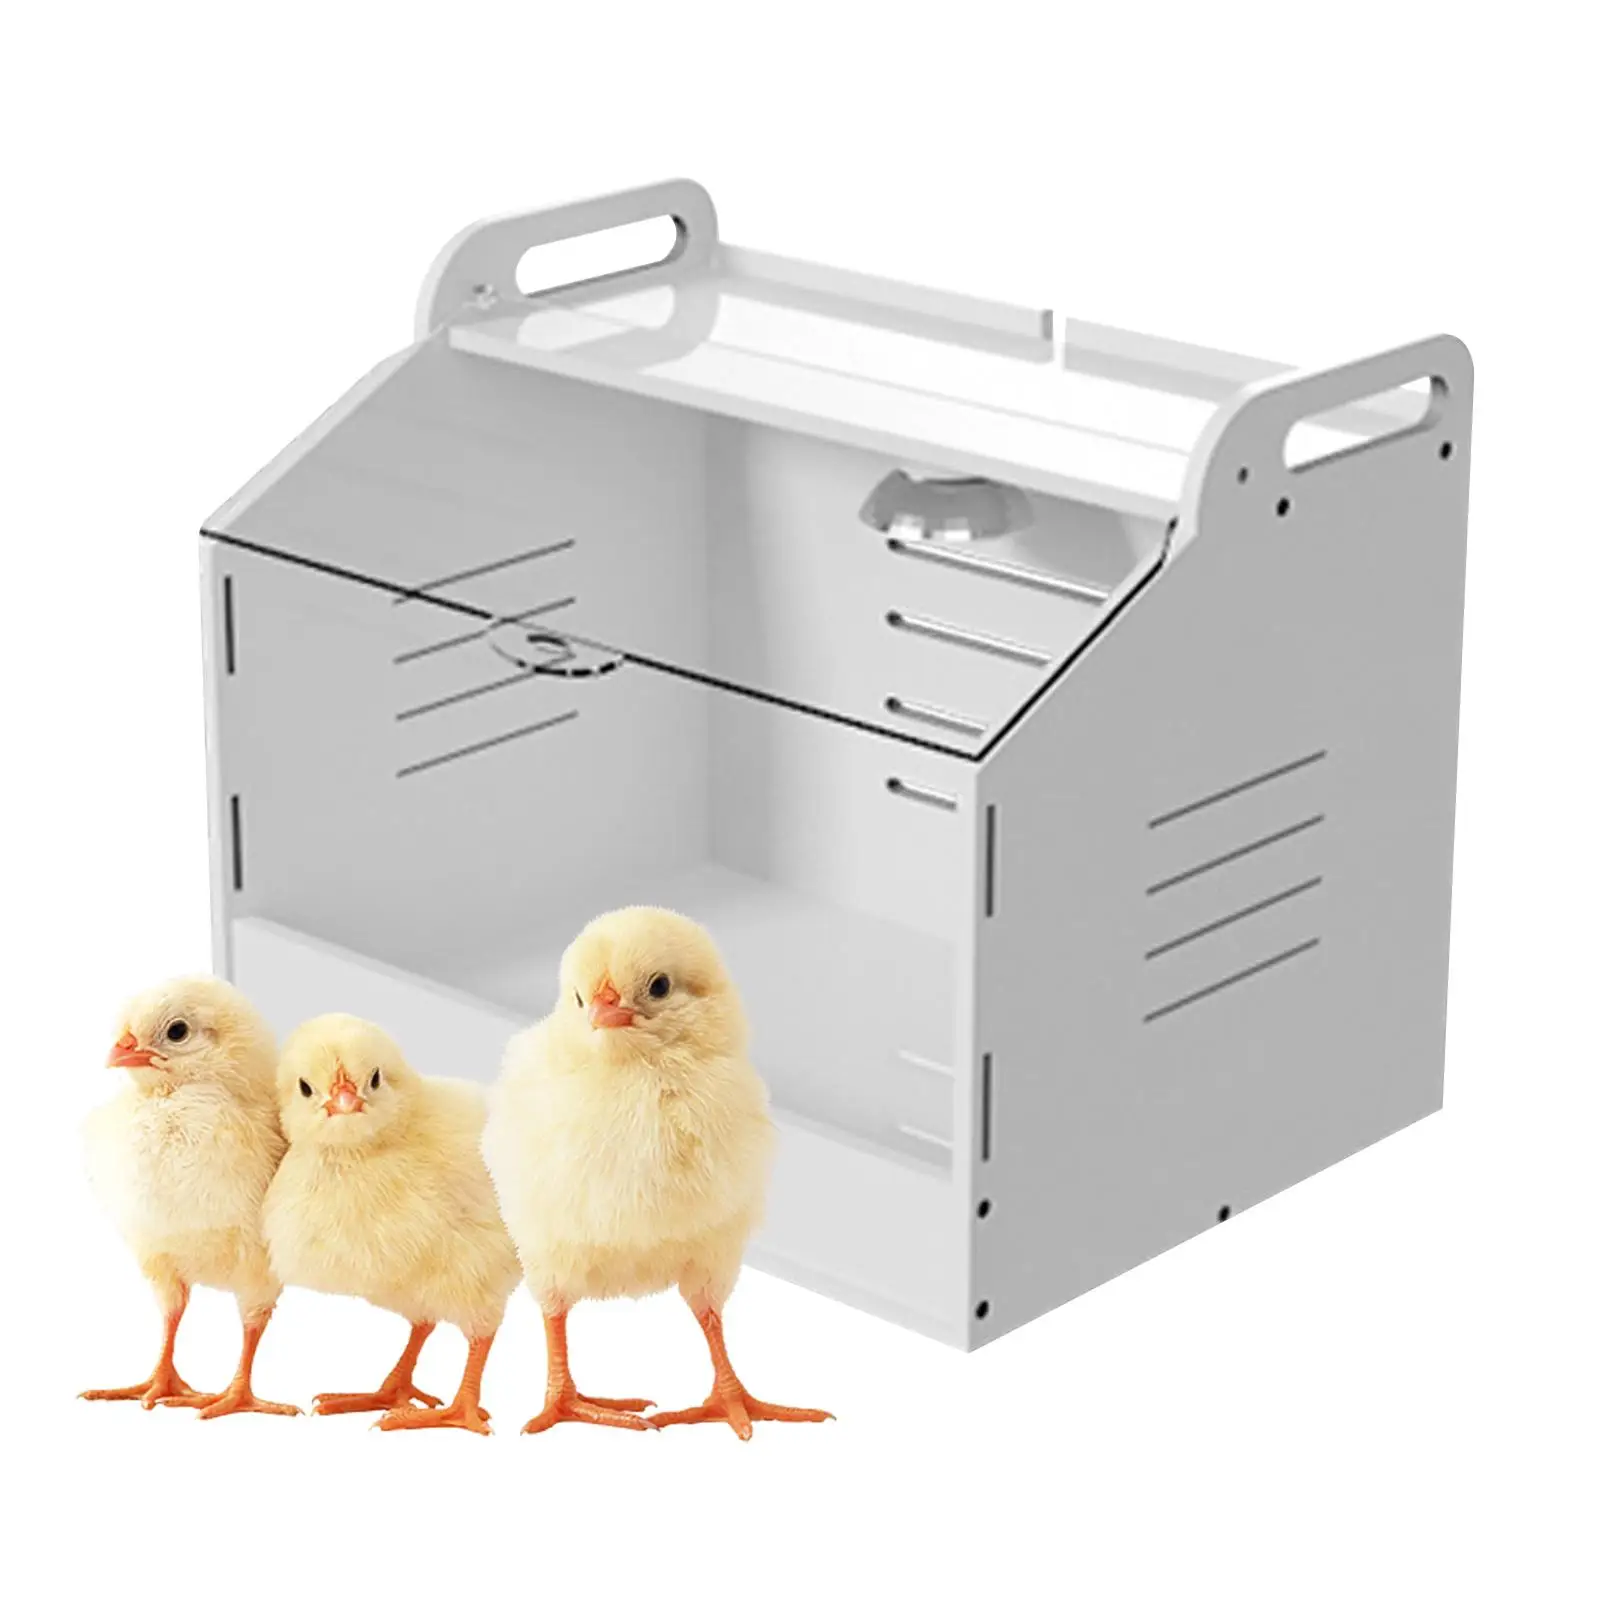 Egg Incubator Hatching High Temperature Incubation Box Automatic Poultry Hatcher Machine Farm Equipment for Turkey Bird Brooding